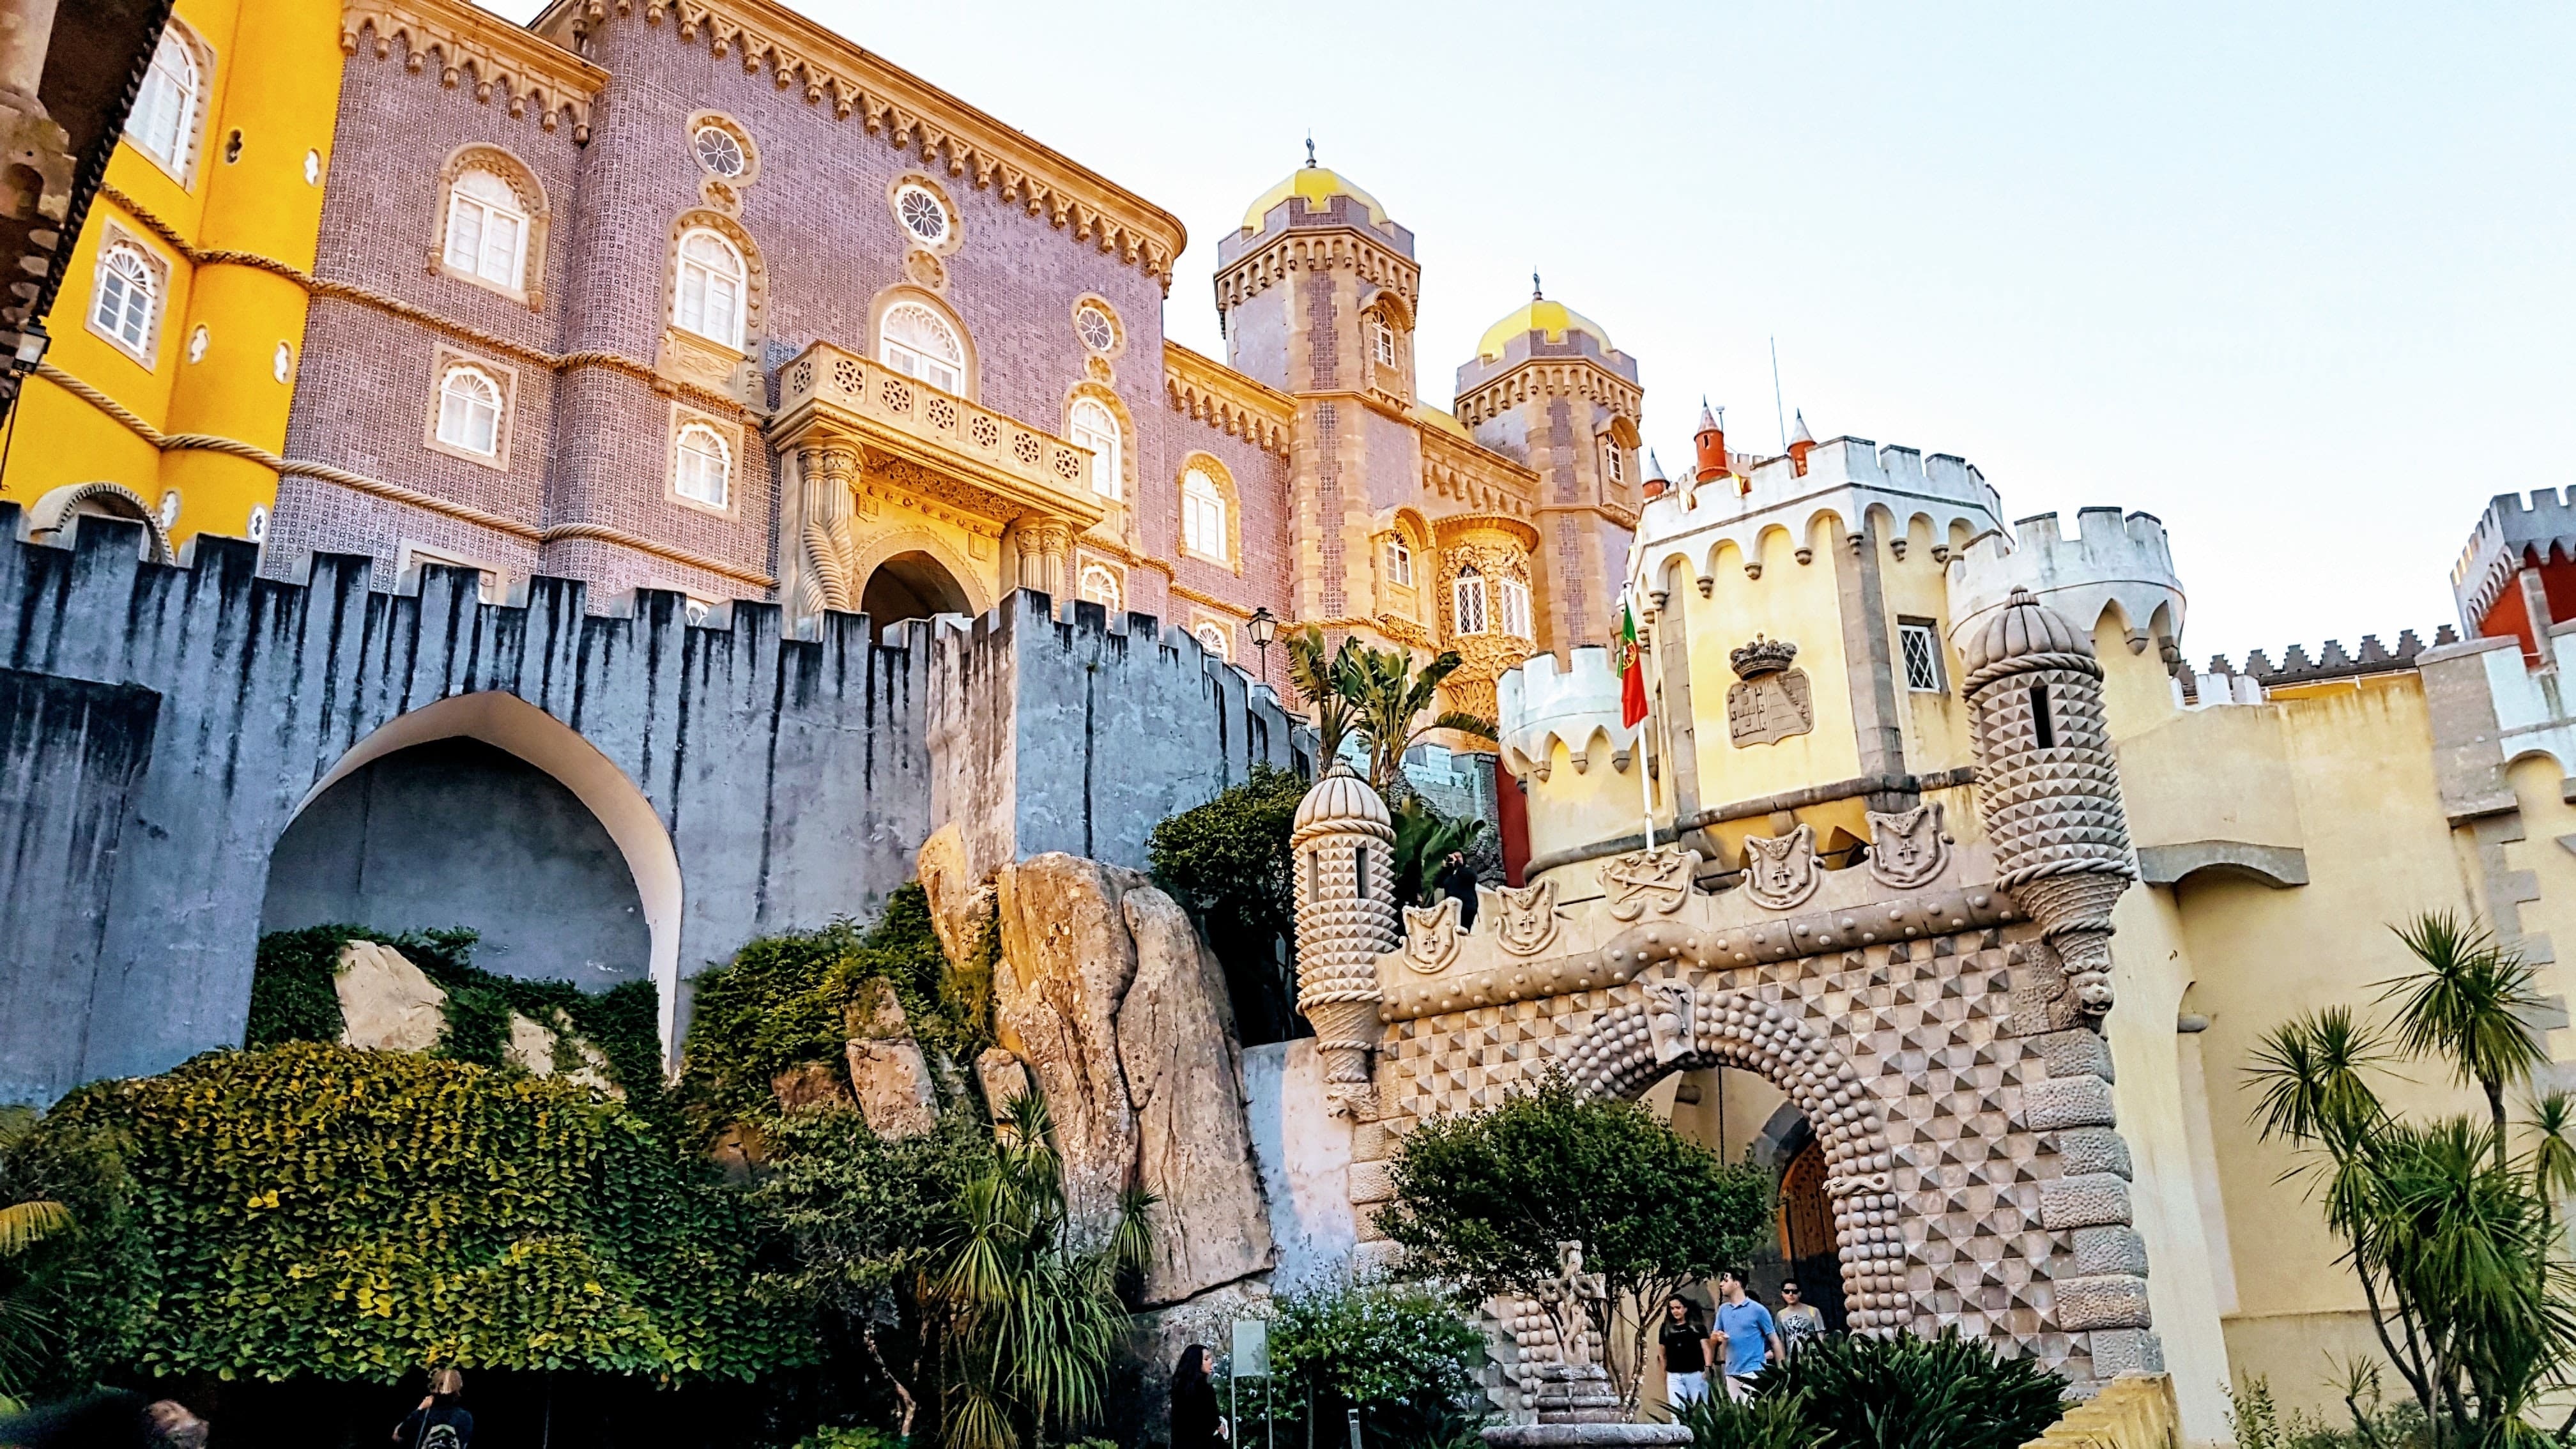 Park and National Palace of Pena in Sintra, Portugal